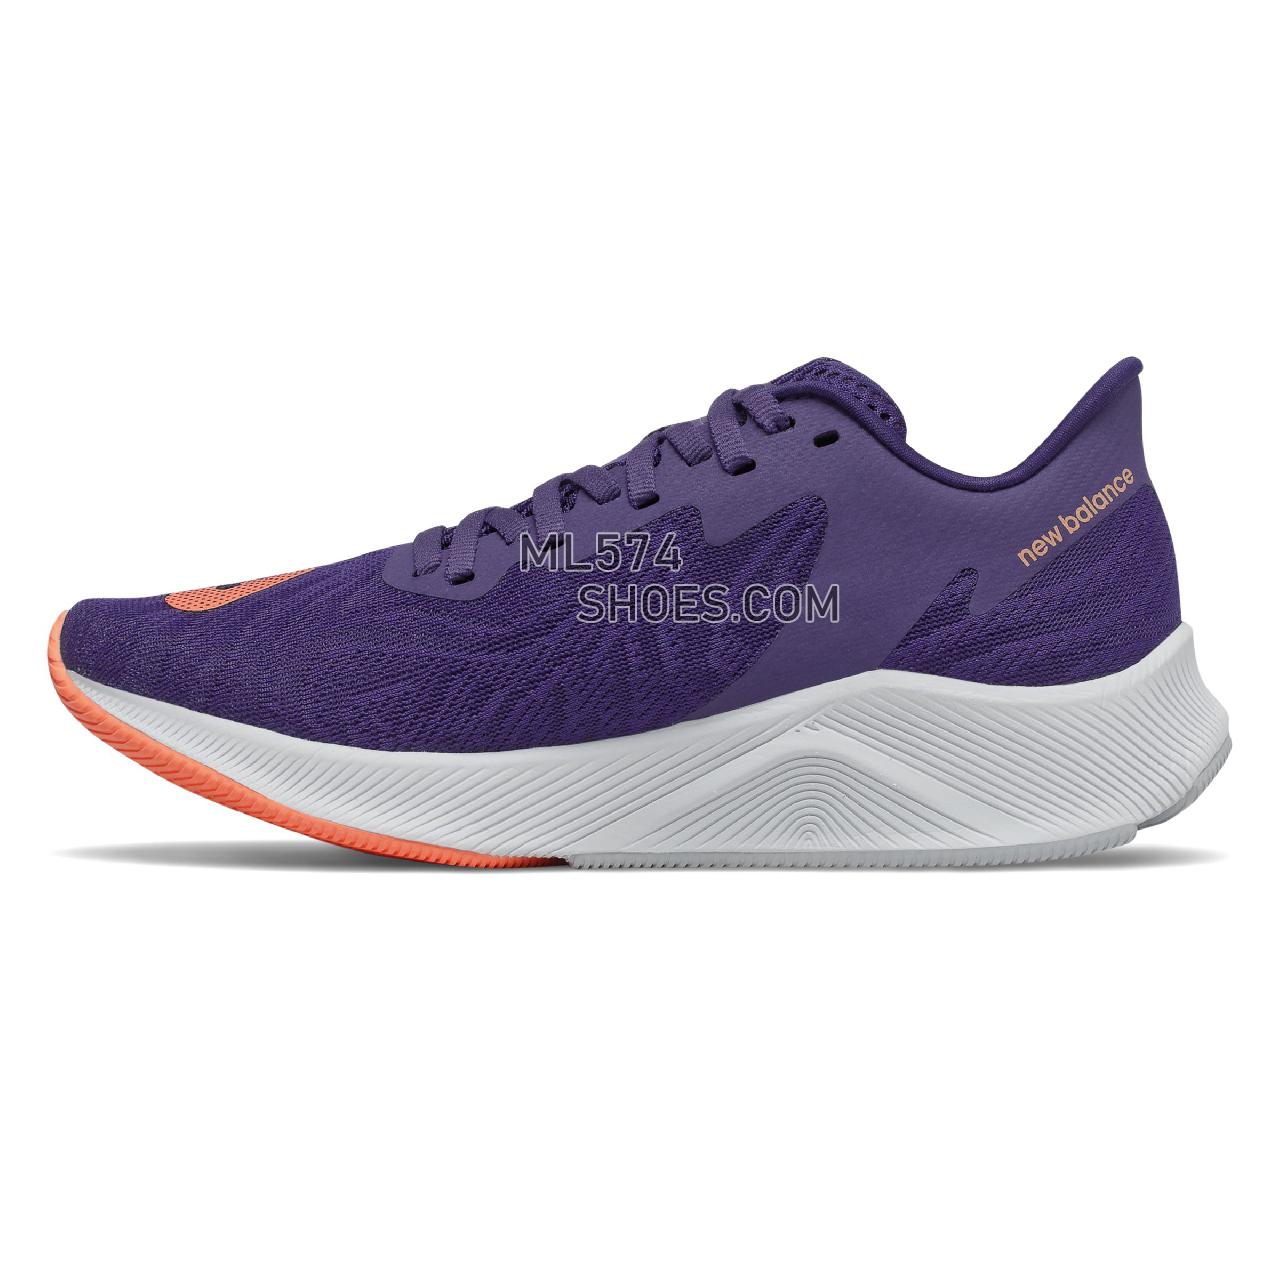 New Balance FuelCell Prism - Women's Stability Running - Virtual Violet with Citrus Punch - WFCPZCG